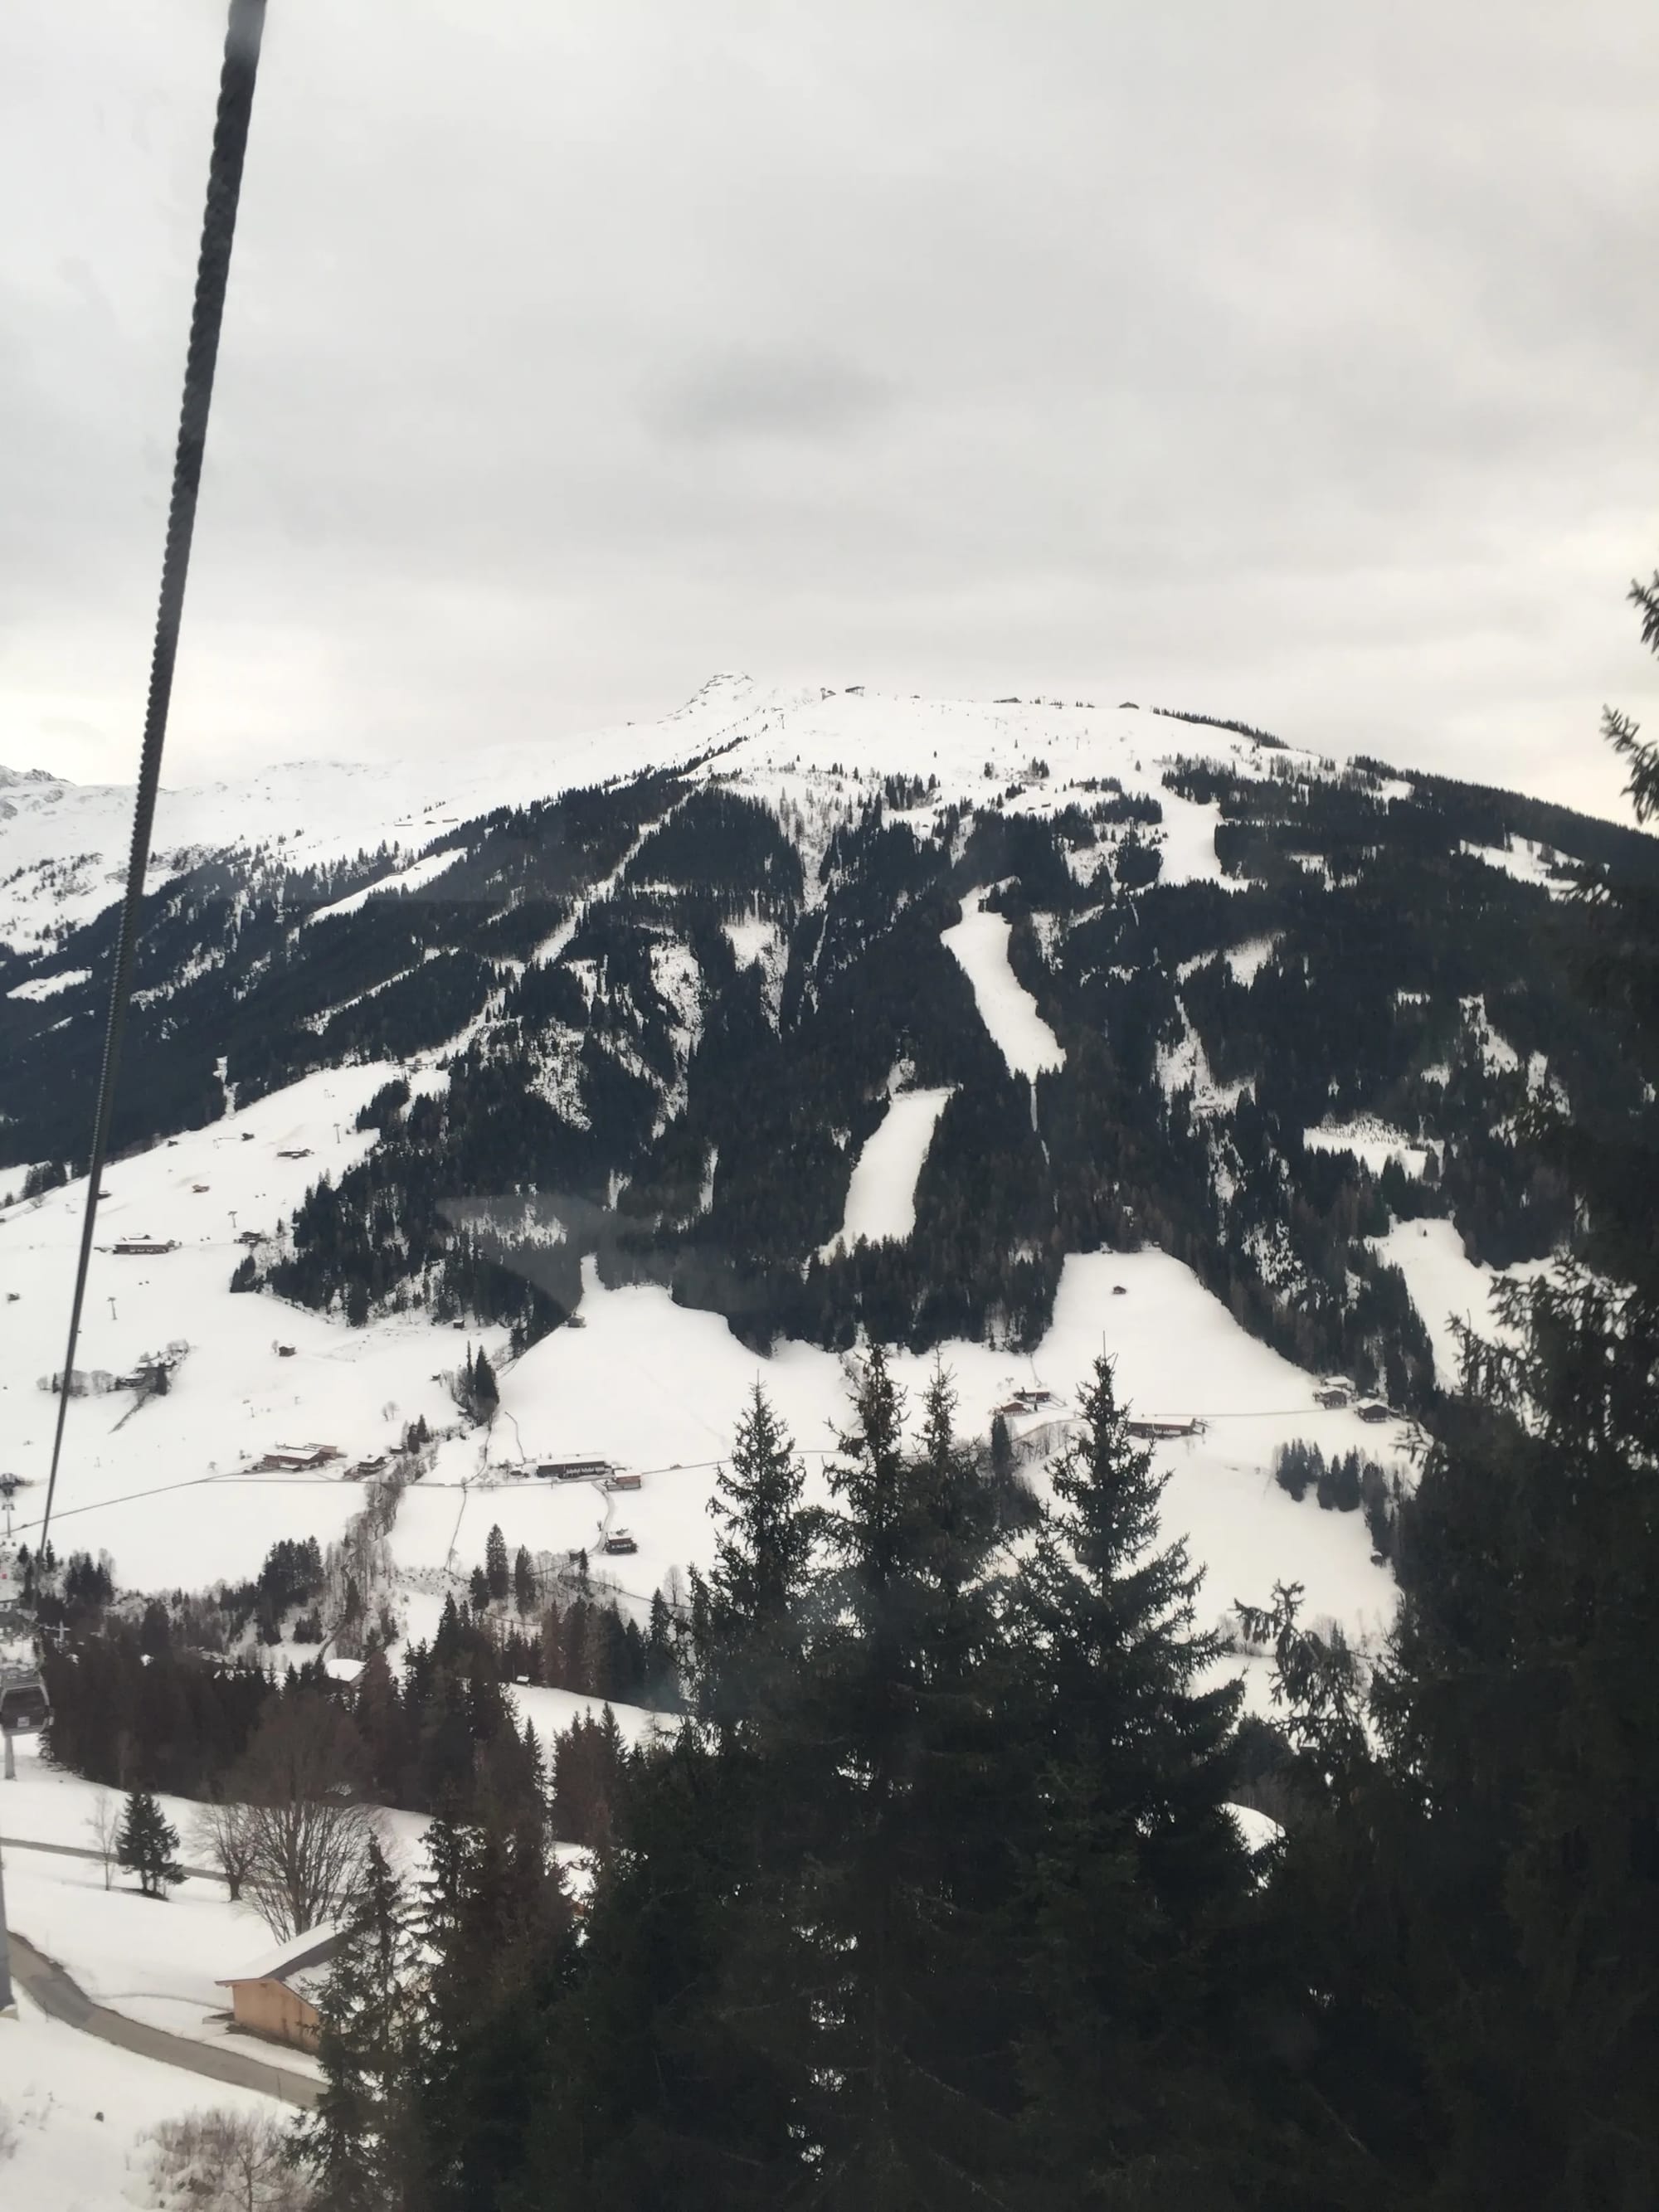 Photo by Author — Auffach — Looking back at Gmahkopf from the gondola up to Schatzberg